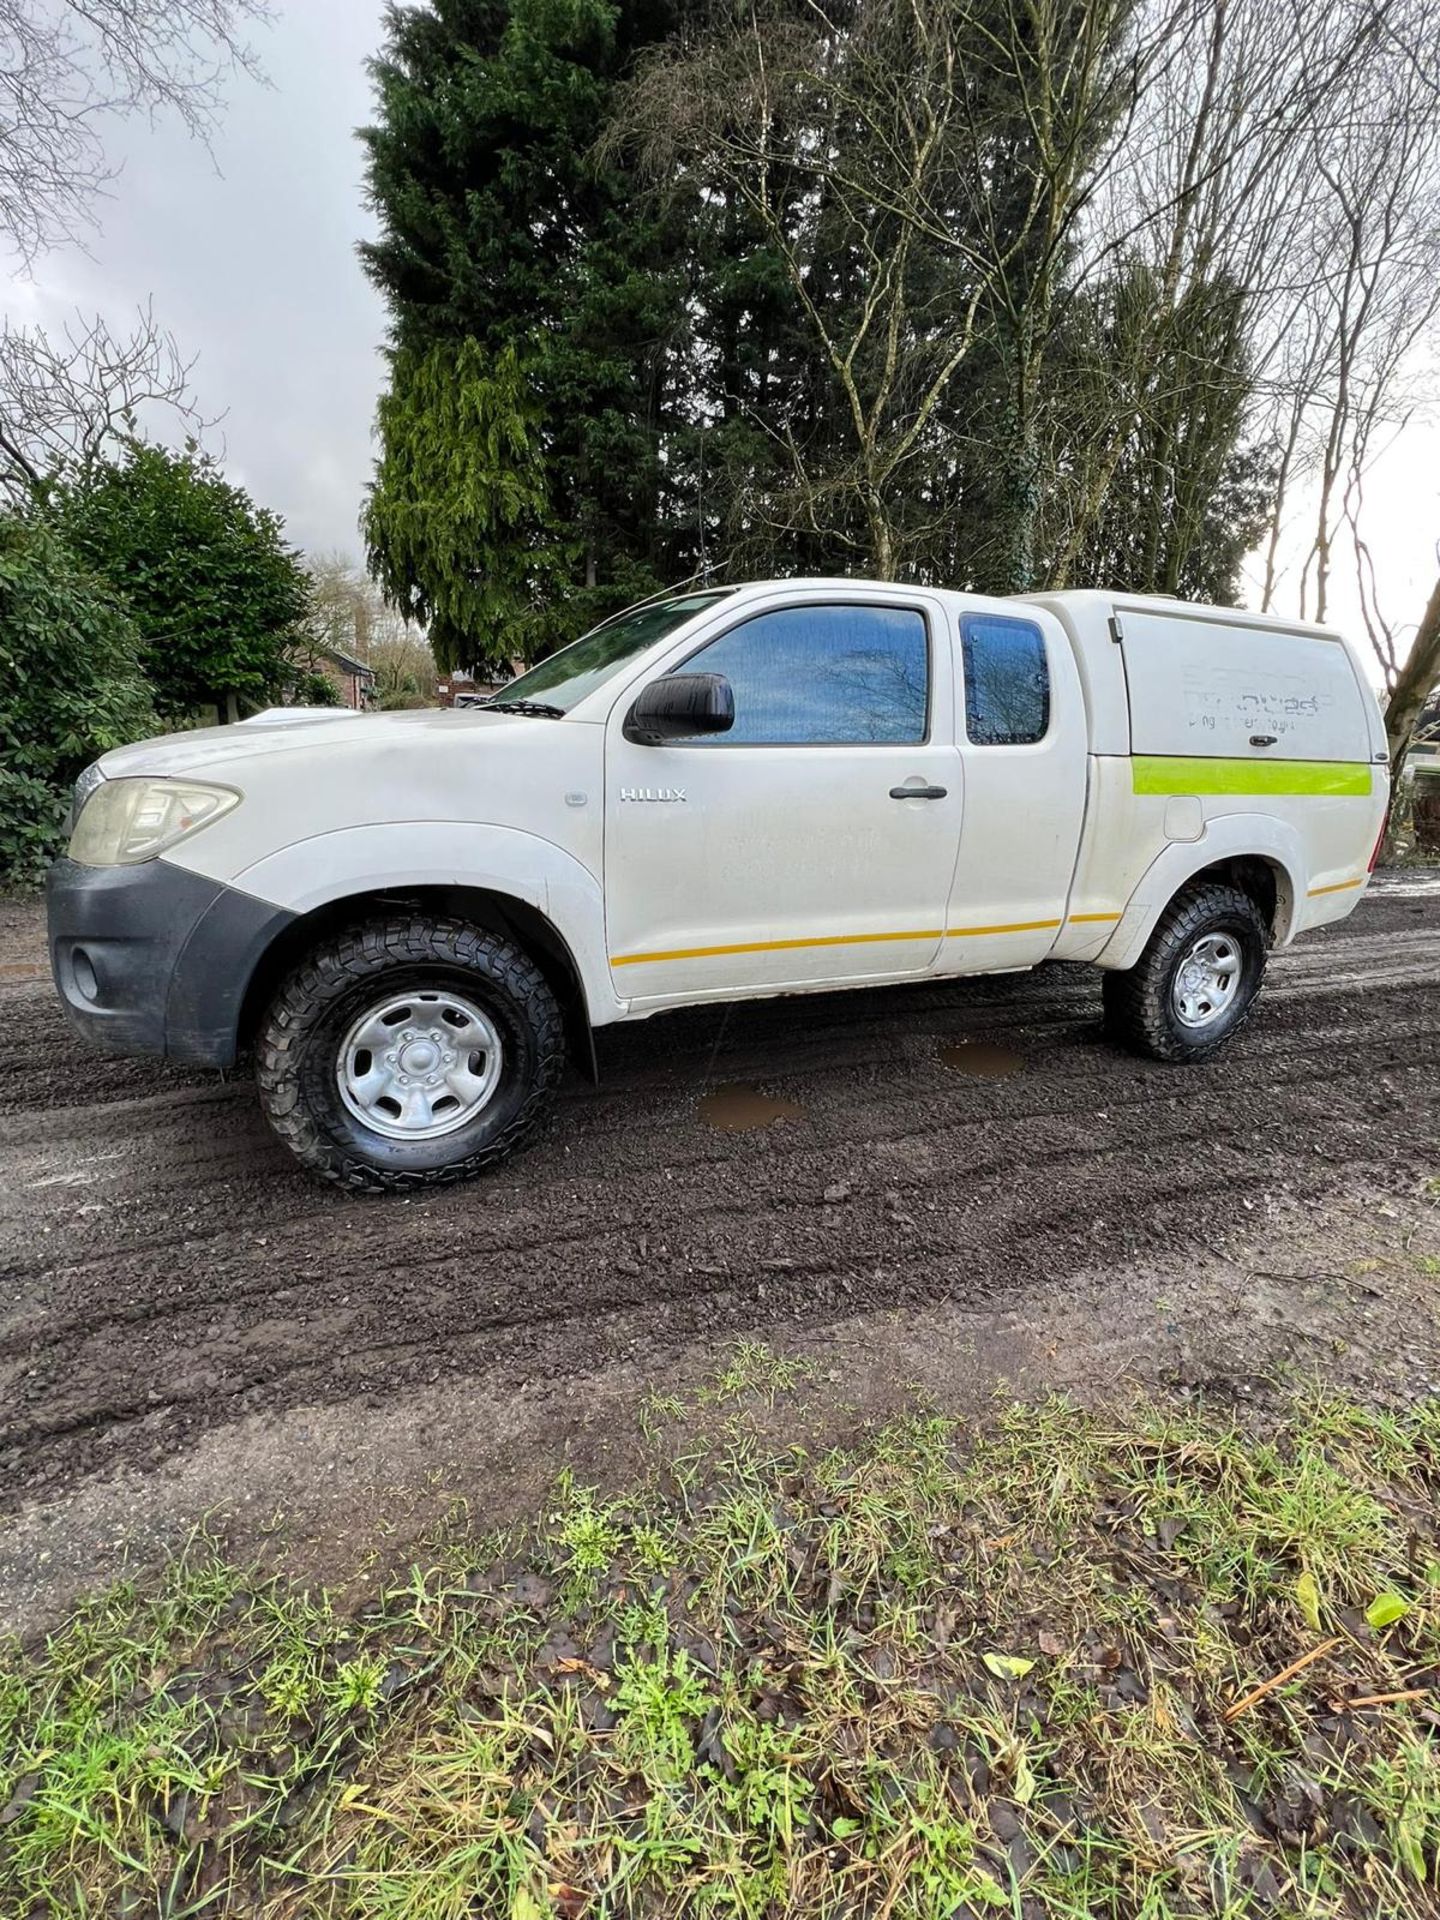 TOYOTA HILUX KING CAB 2010 EX COUNCIL - Image 2 of 16